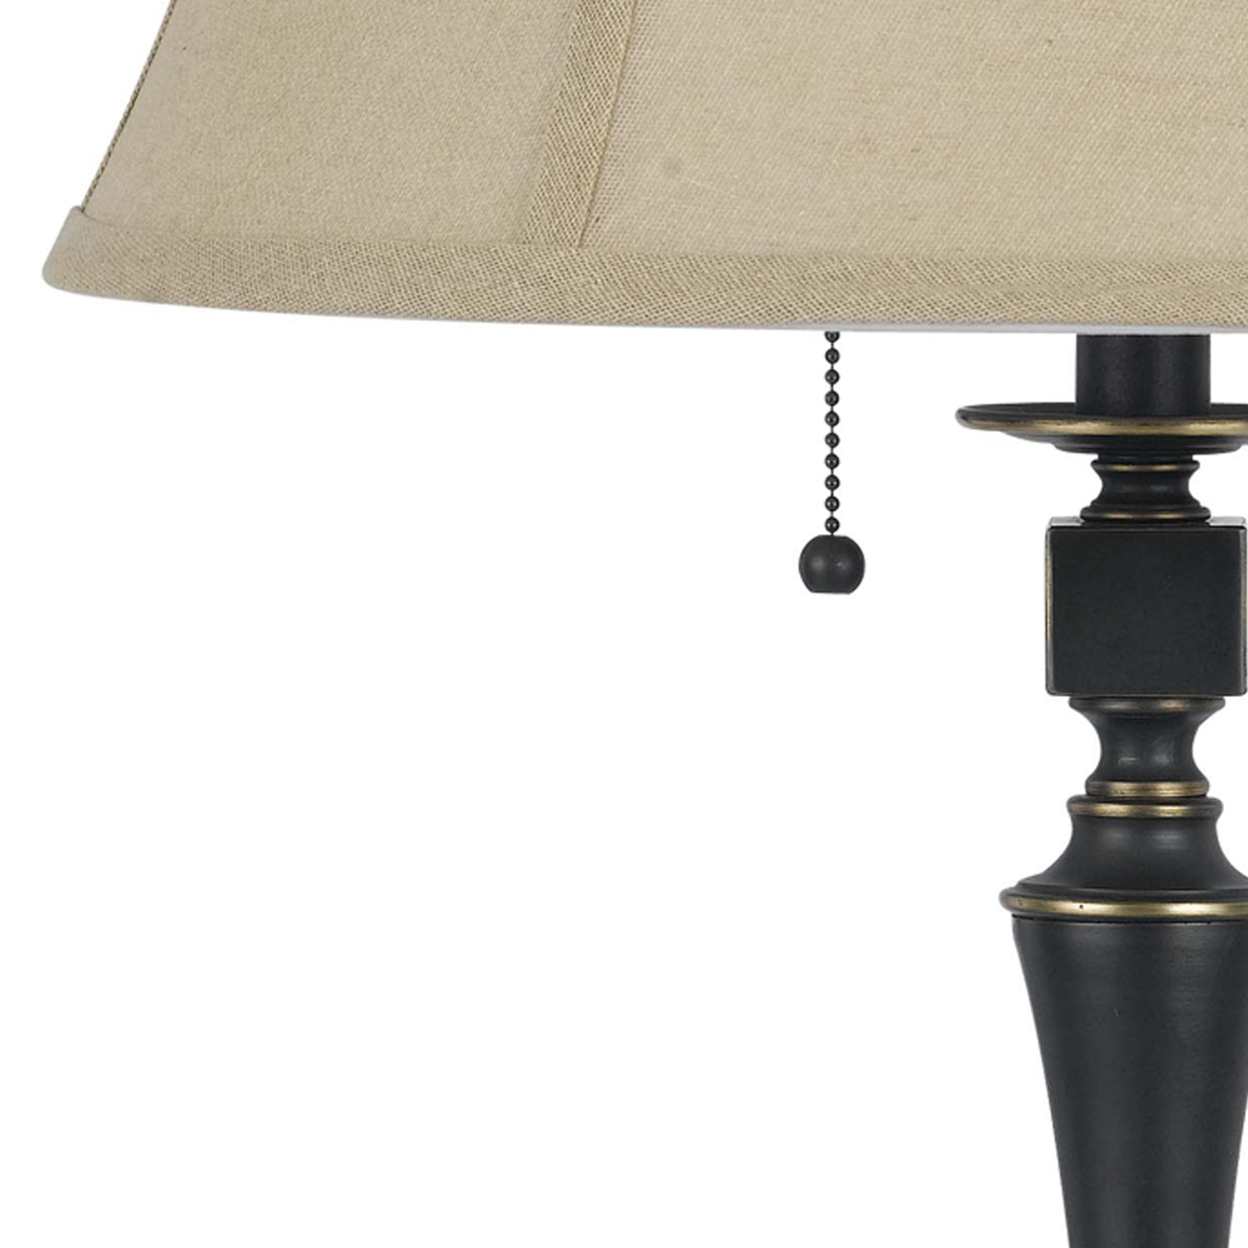 Metal Body Table Lamp With Fabric Tapered Bell Shade, Beige And Black- Saltoro Sherpi